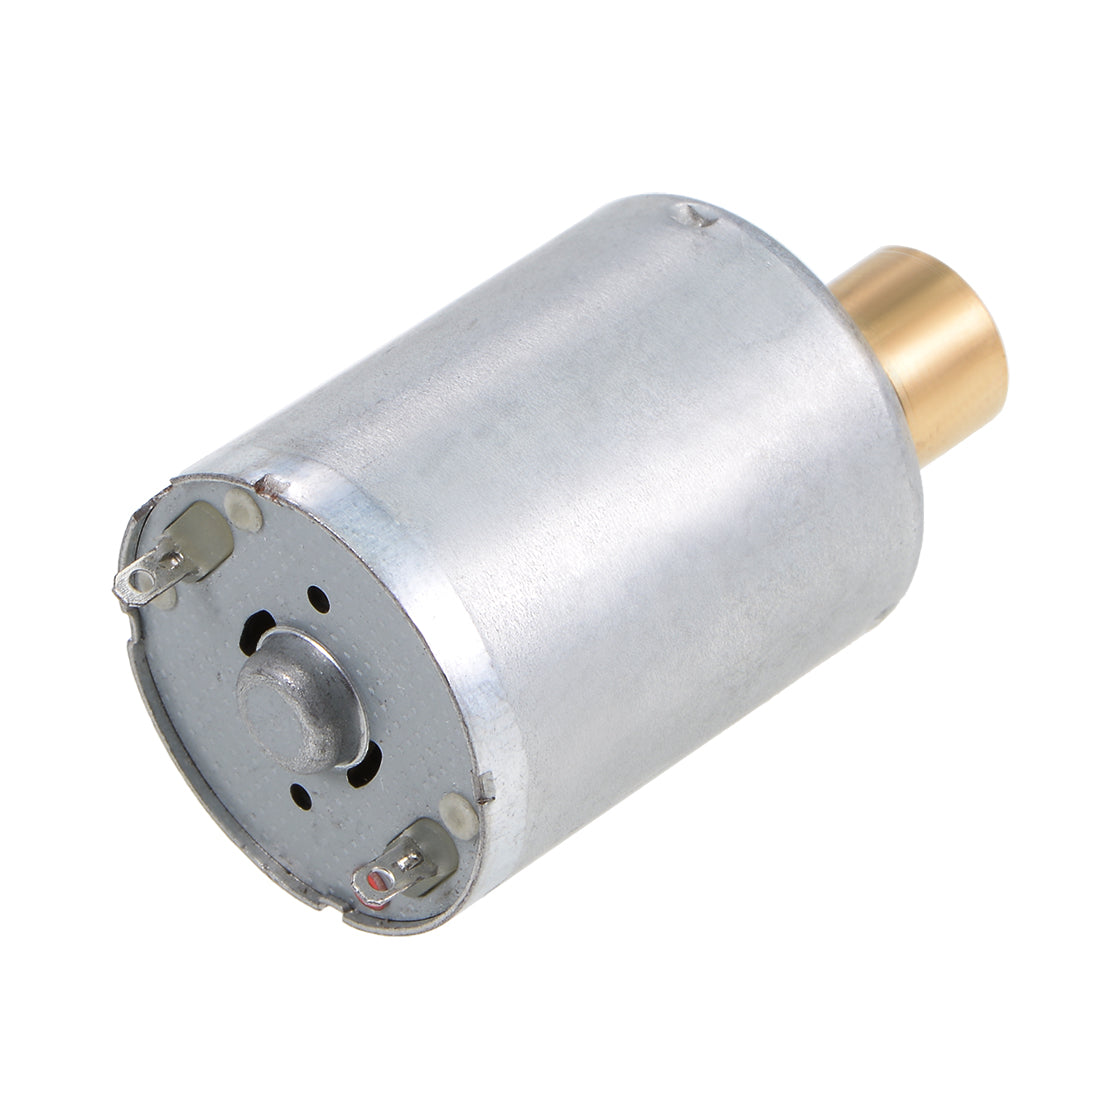 uxcell Uxcell Vibration Motors DC 12V 380mA 8000RPM Vibrating Motor Strong Power for DIY Electric  Massager 44x24mm